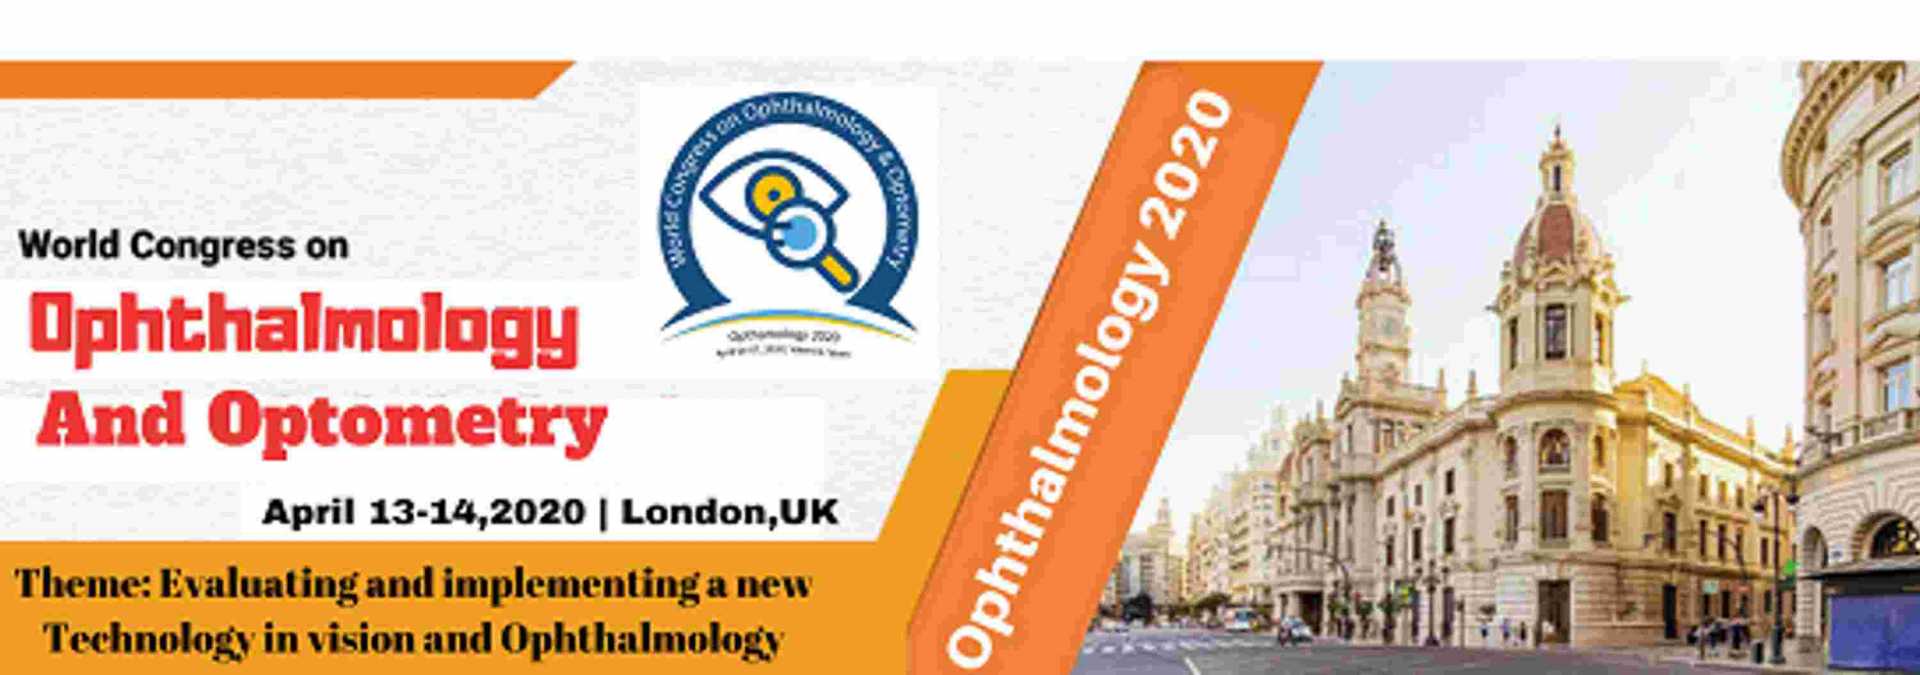 World Congress on Ophthalmology & Optometry Medical Events